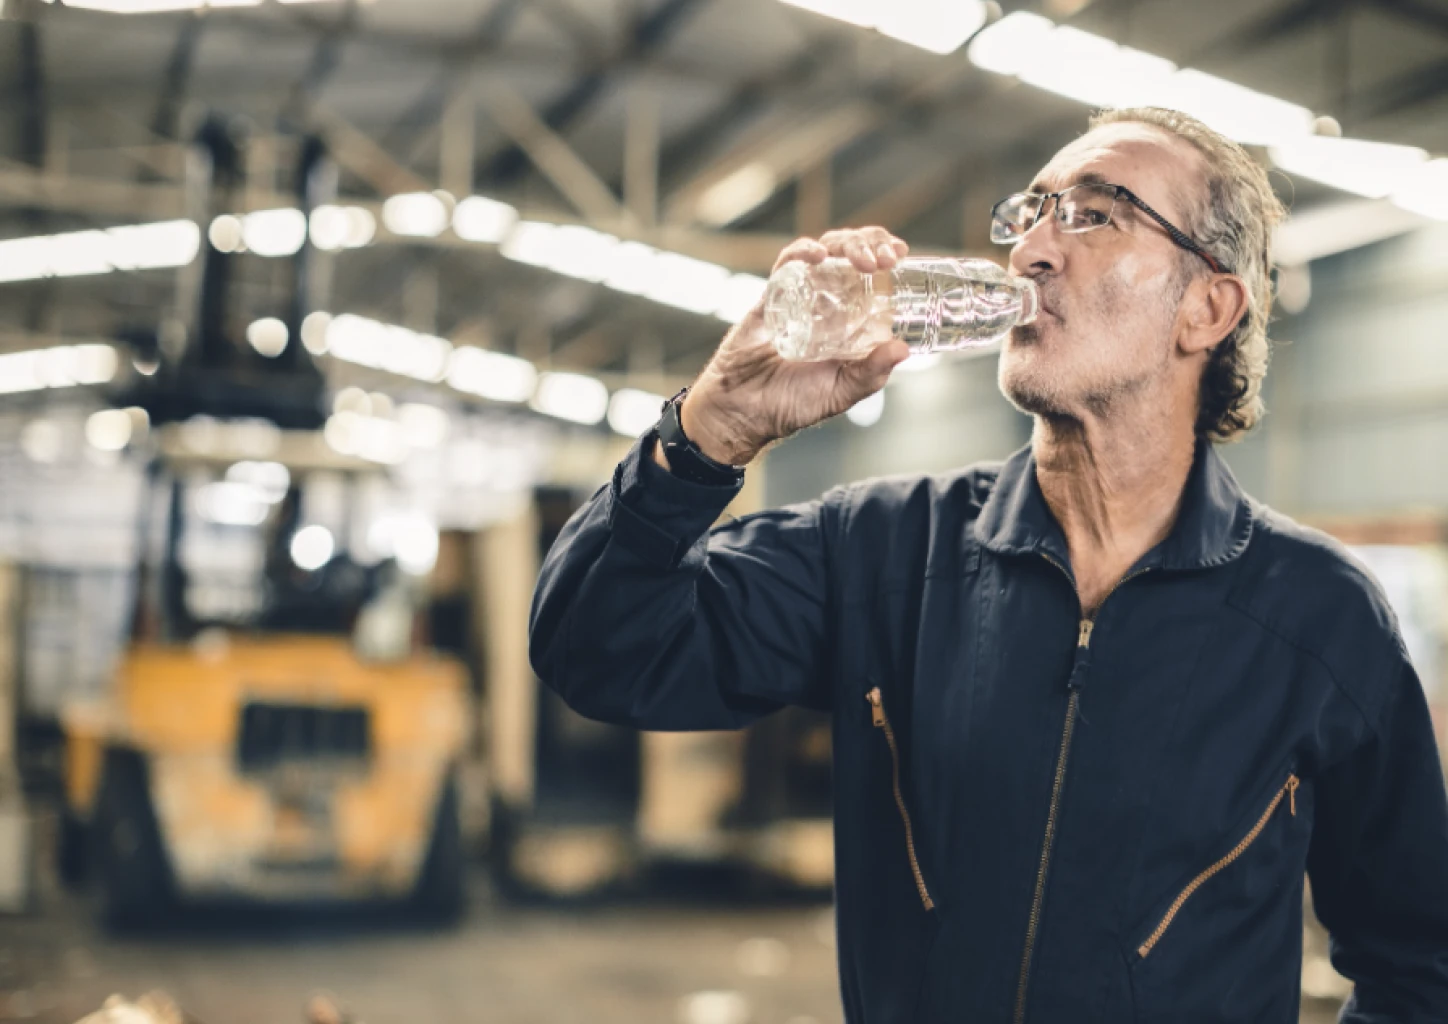 A man drinks water in a warehouse